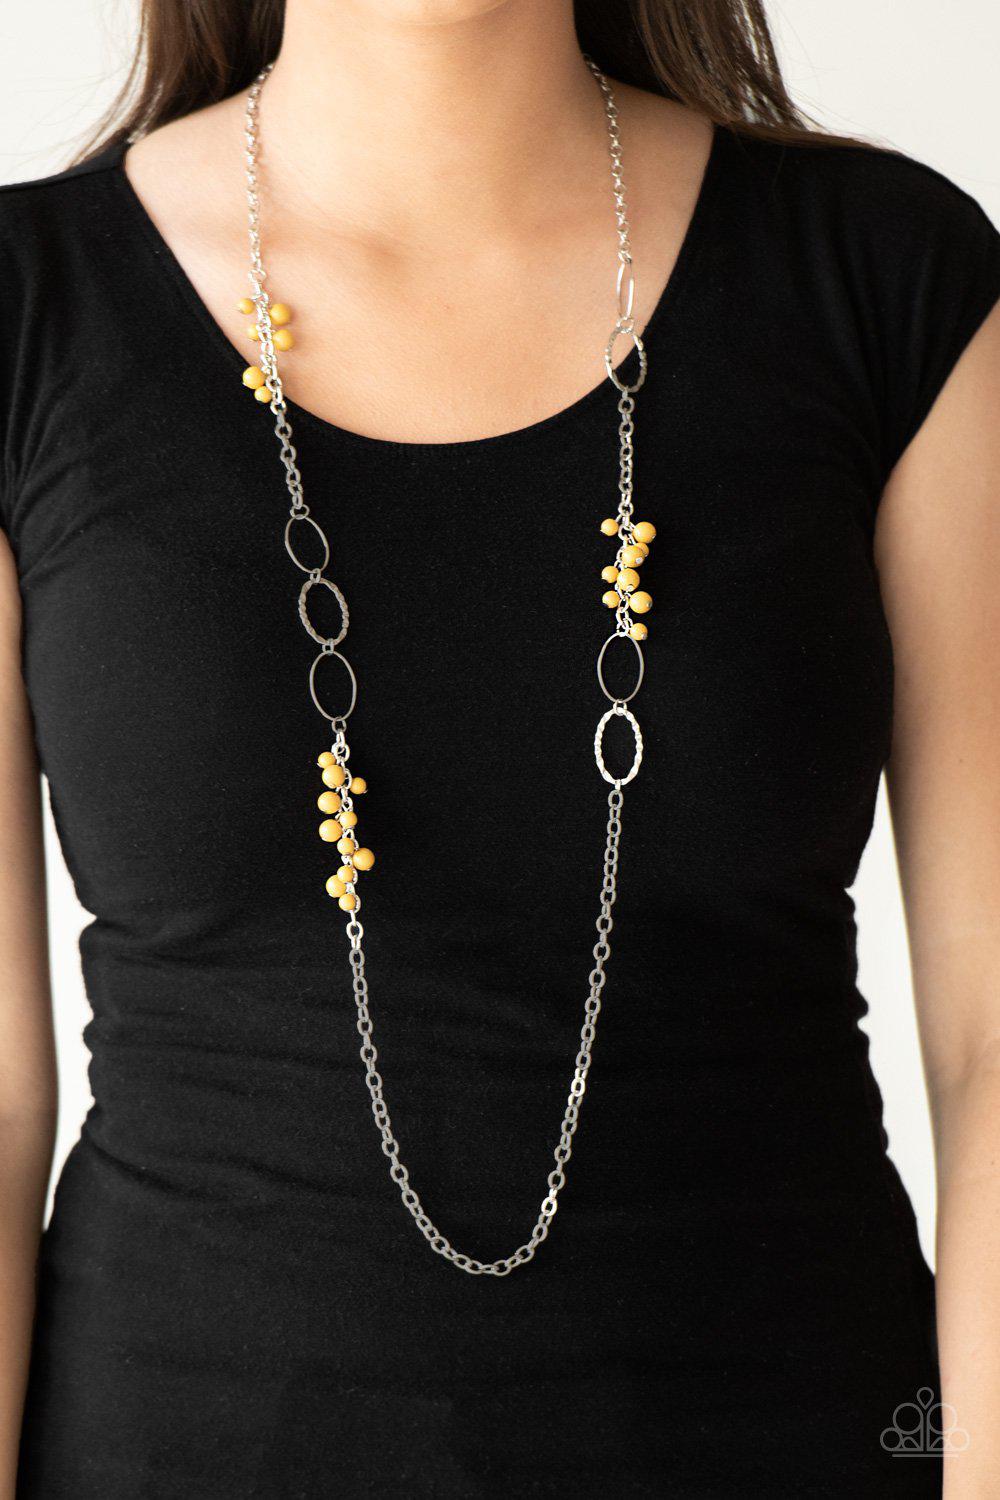 Flirty Foxtrot Yellow and Silver Necklace - Paparazzi Accessories - model -CarasShop.com - $5 Jewelry by Cara Jewels